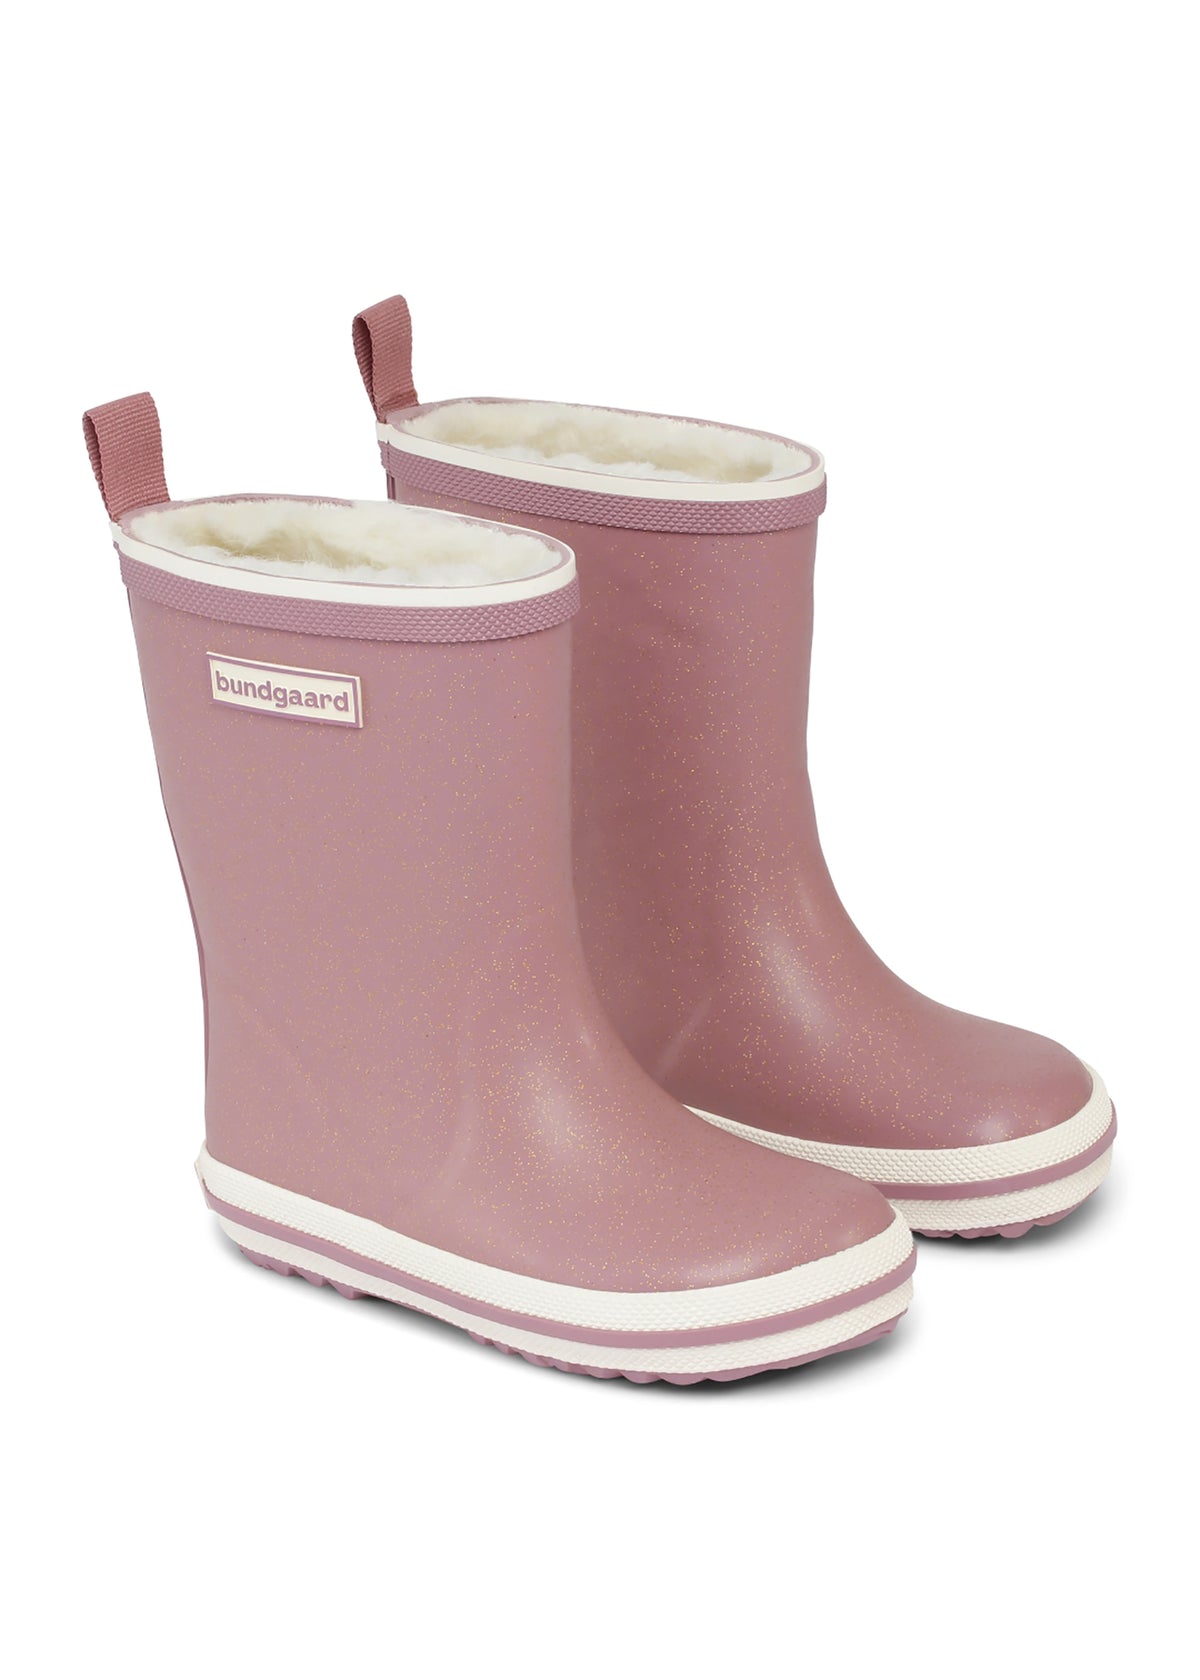 Rubber boots with a warm lining - light pink glitter, Charly High Warm